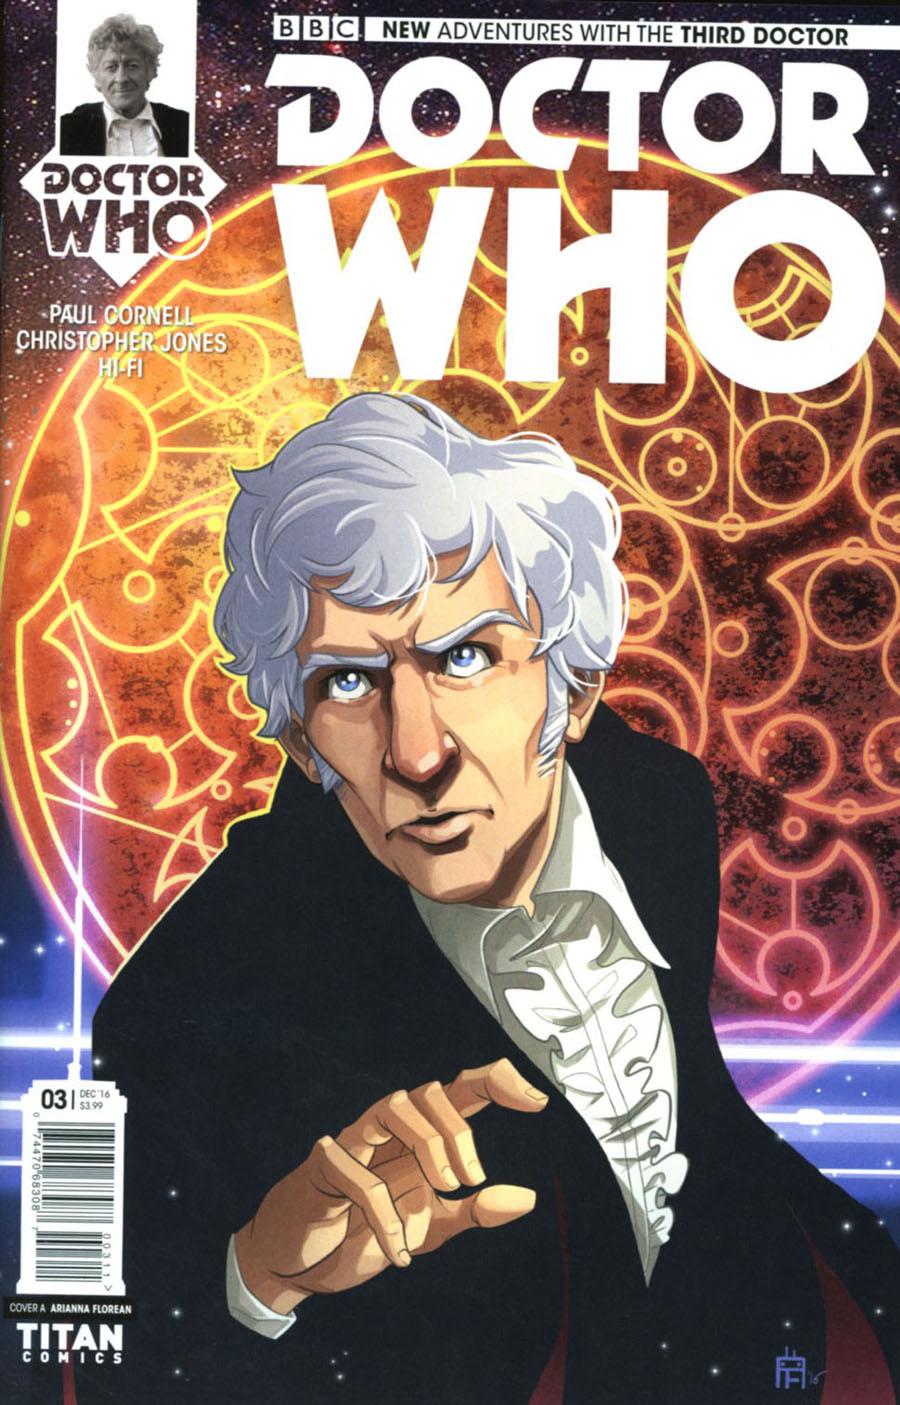 Doctor Who 3rd Doctor Vol. 1 #3